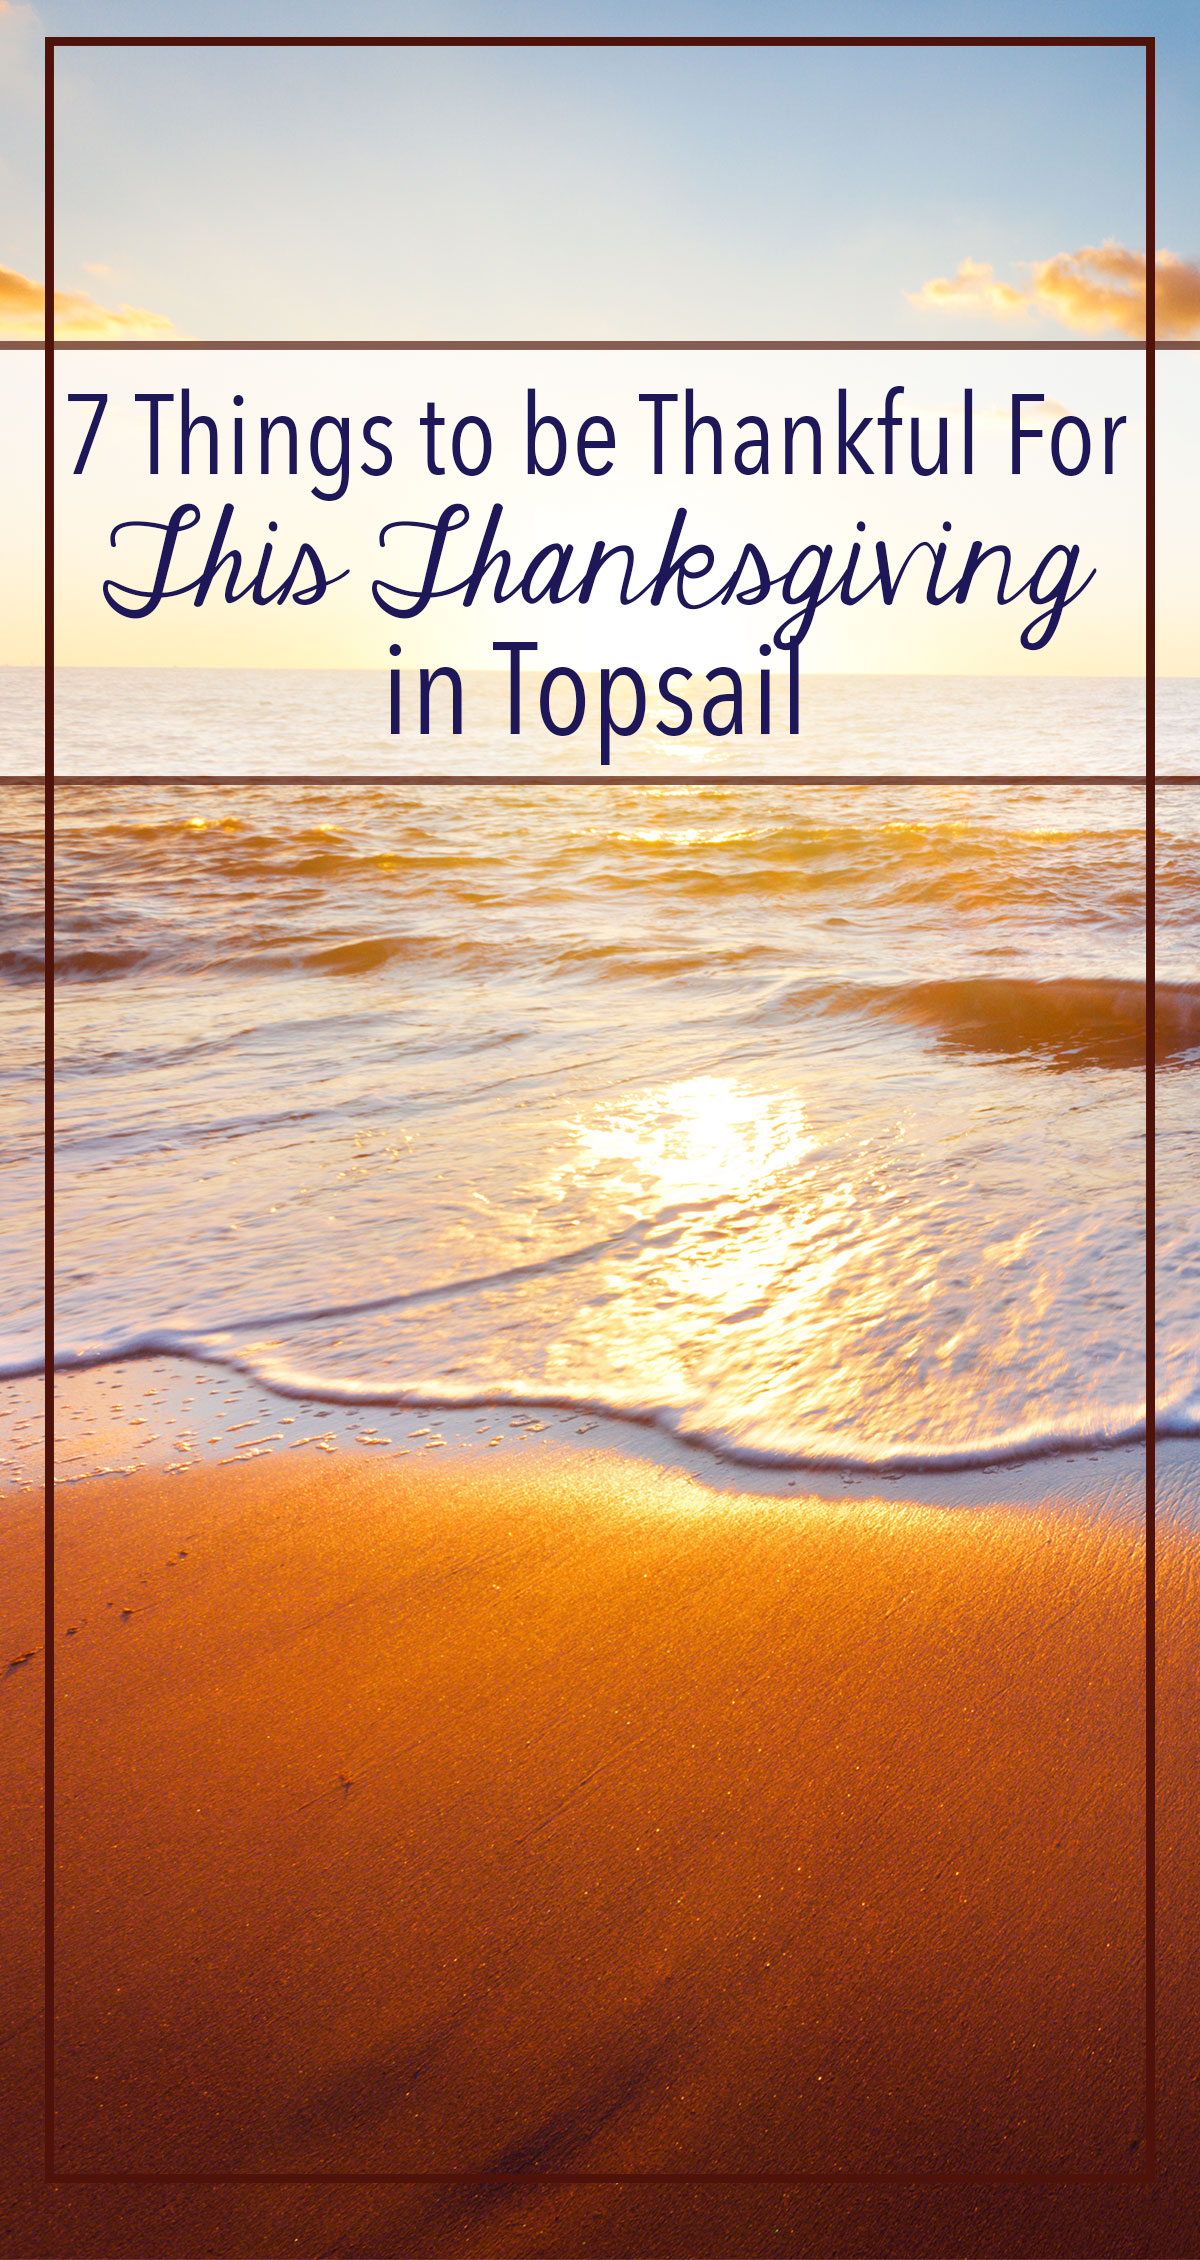 7 Things to be Thankful for This Thanksgiving in Topsail Pin